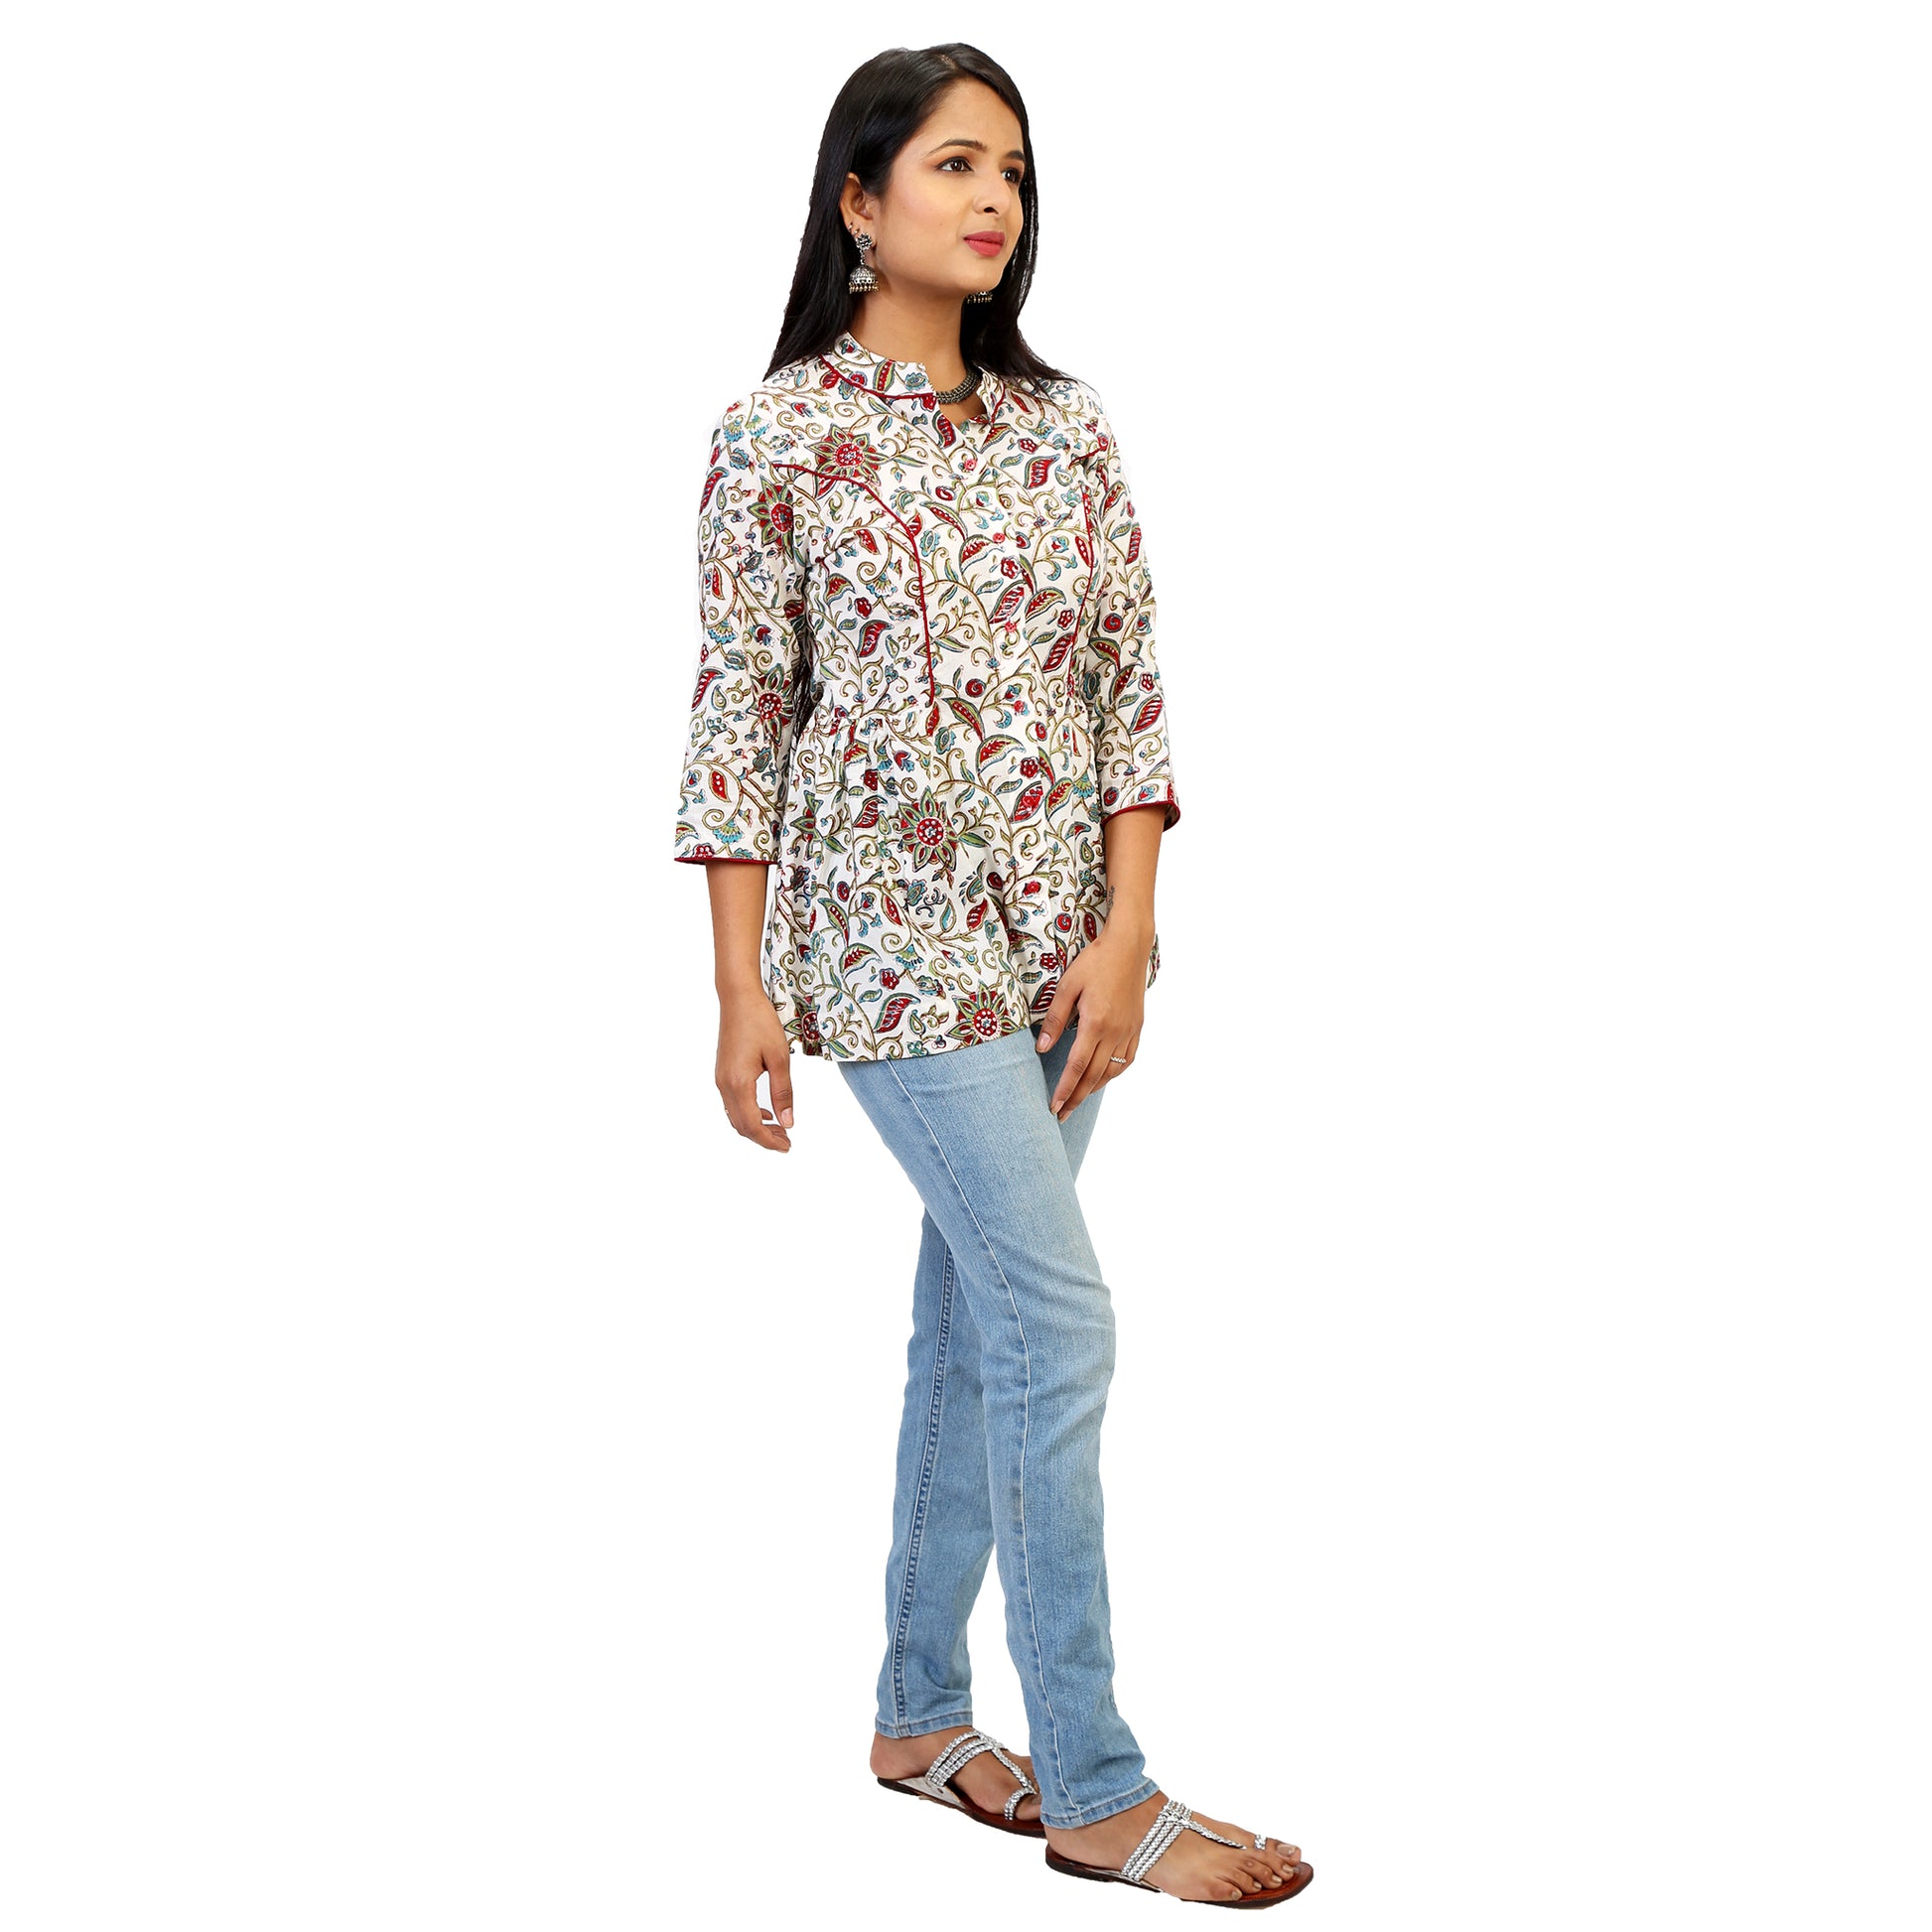 summery cotton floral top for women online